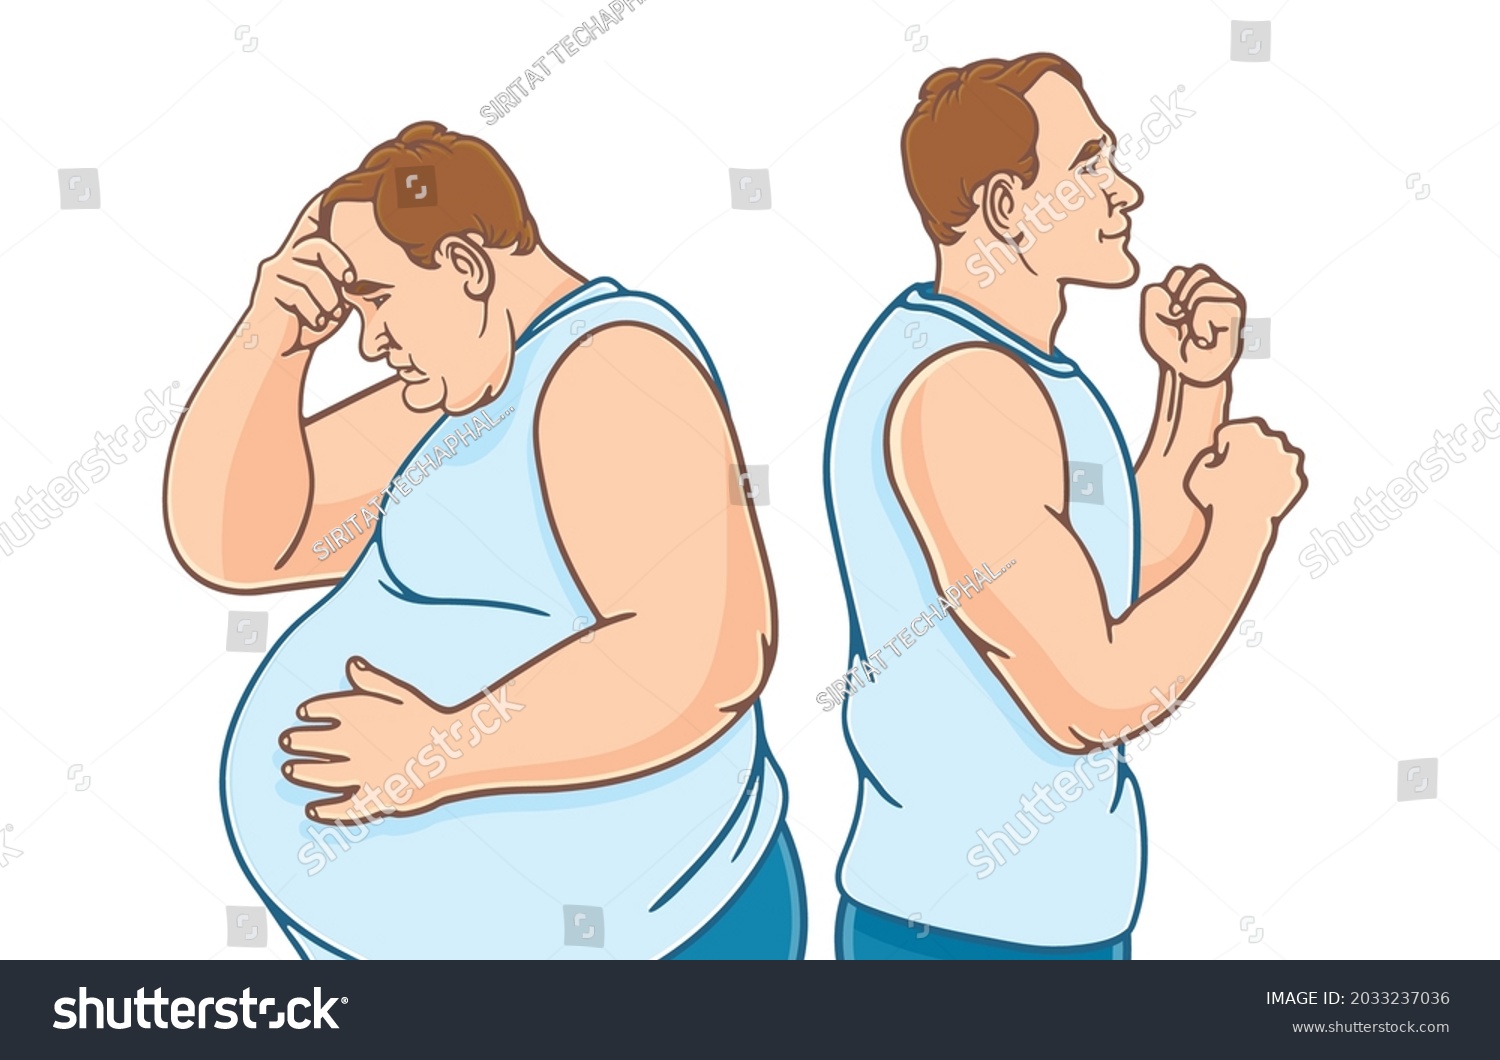 SVG of Two mature men of different body size standing together back to back, fat and lean abdomen, side view, before and after weight loss, Fat people's weight loss problem Concept. Vector illustration. svg